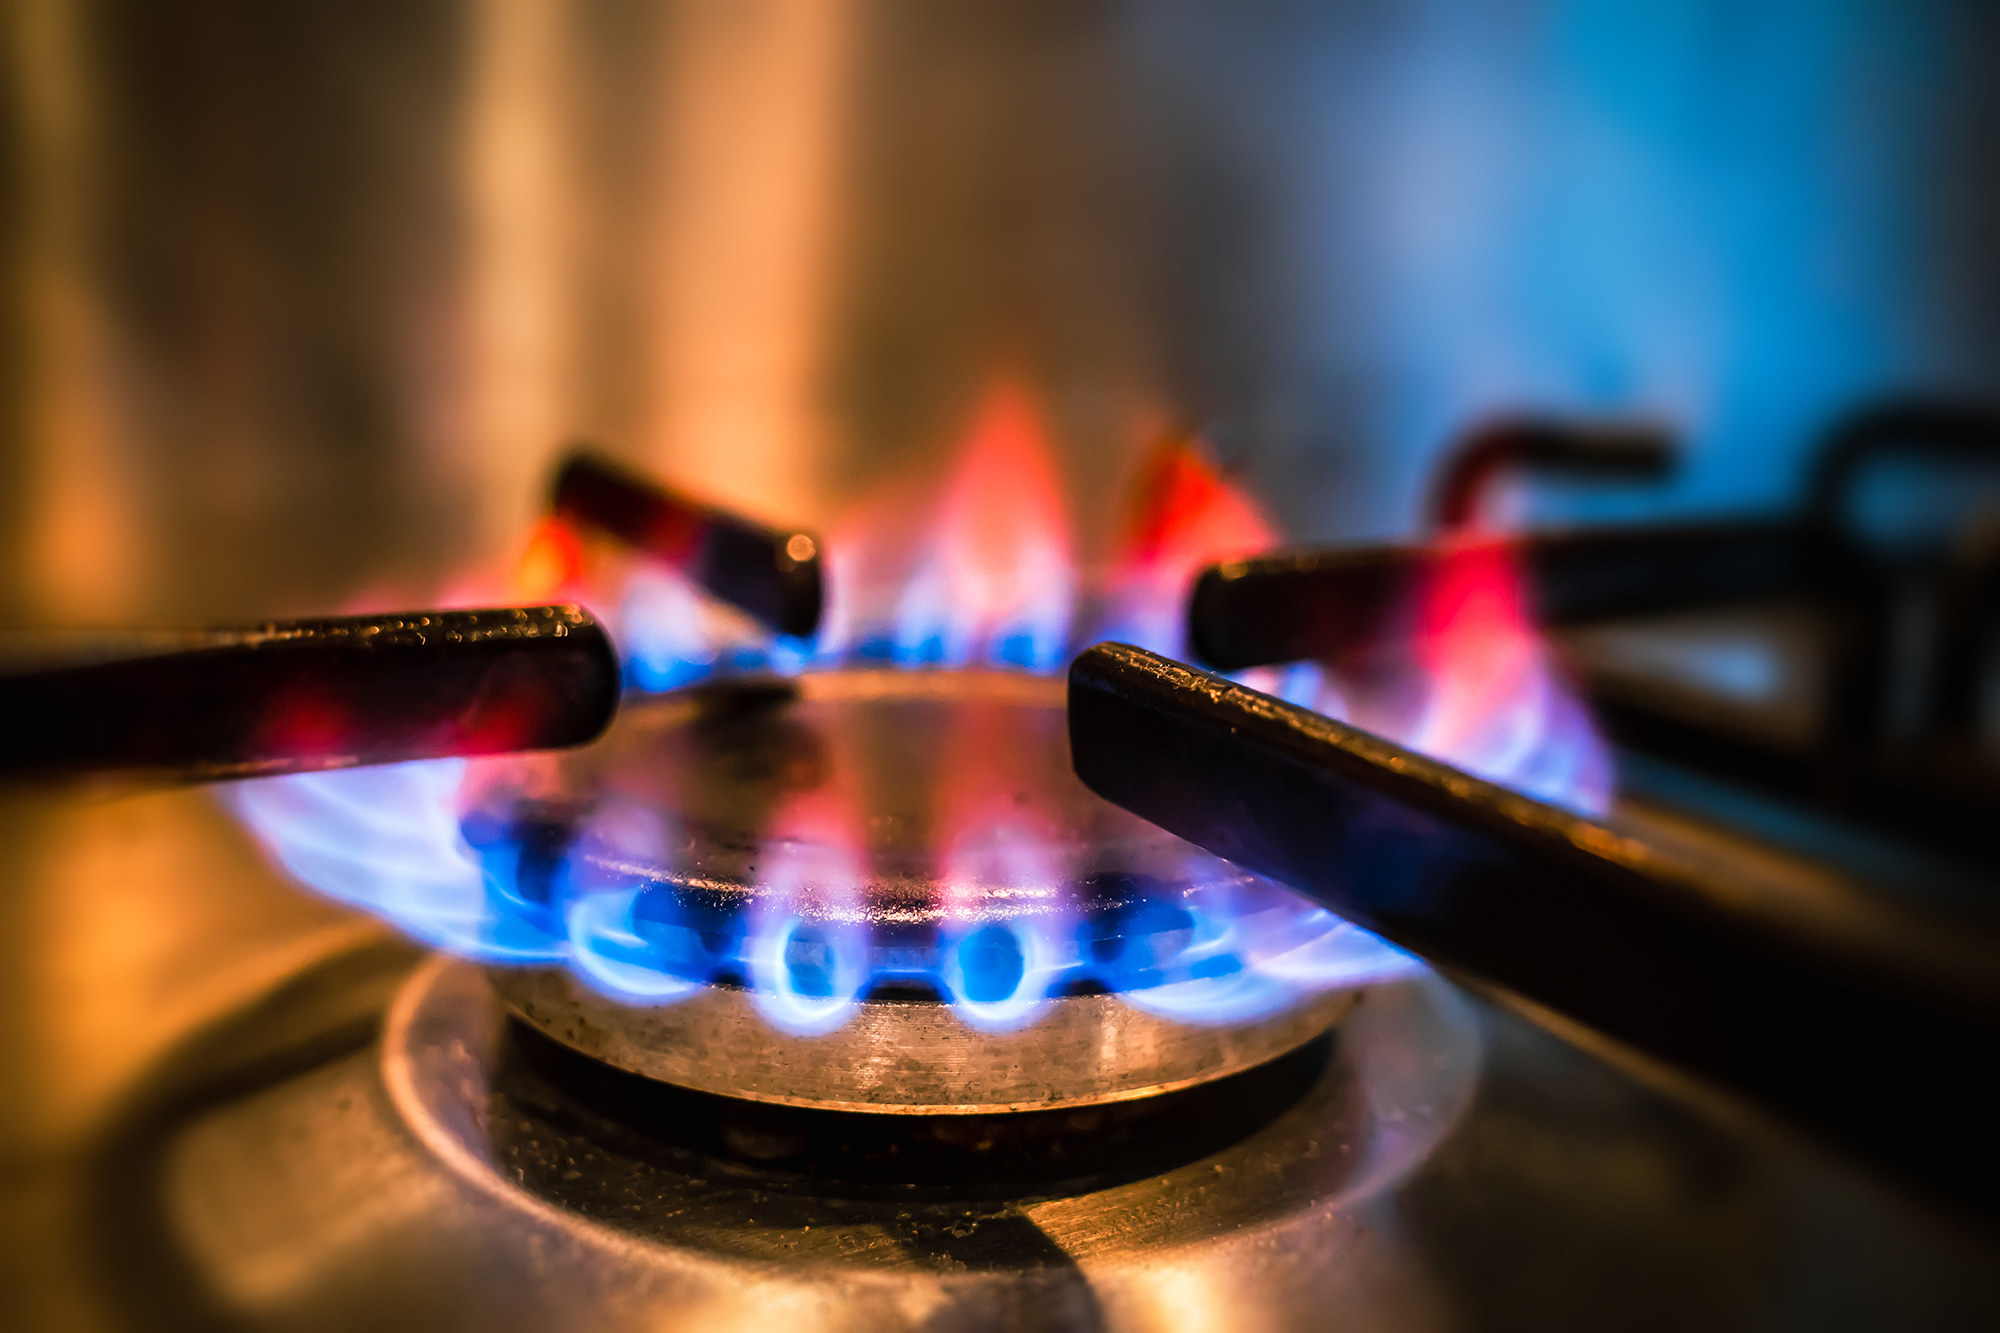 Everything you need to know about gas stoves - Reviewed